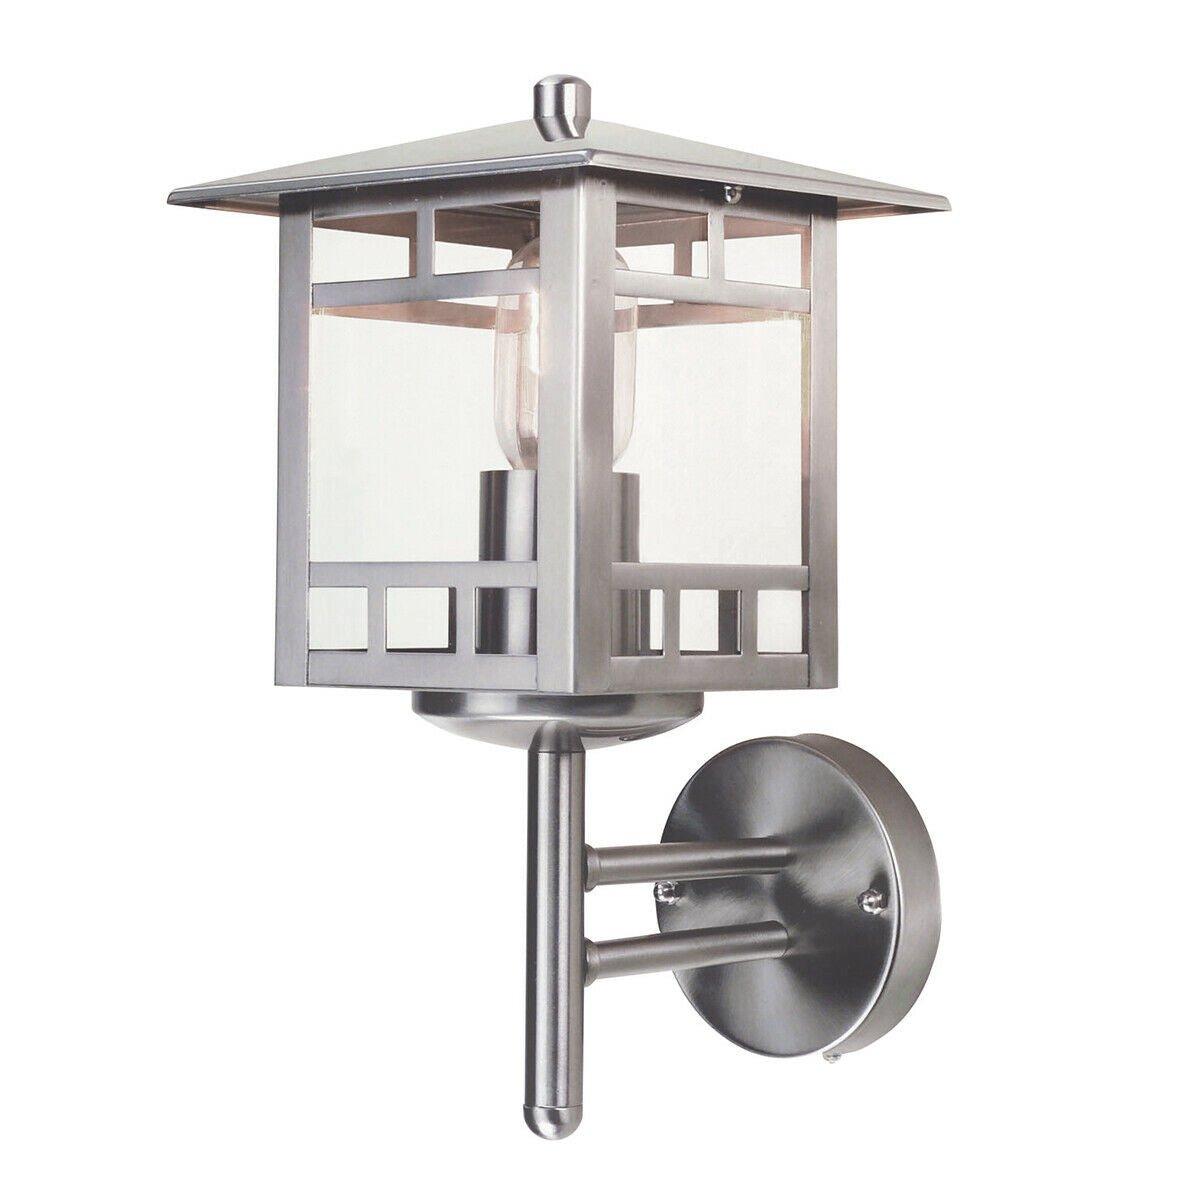 Outdoor IP44 Wall Light Stainless Steel LED E27 100W